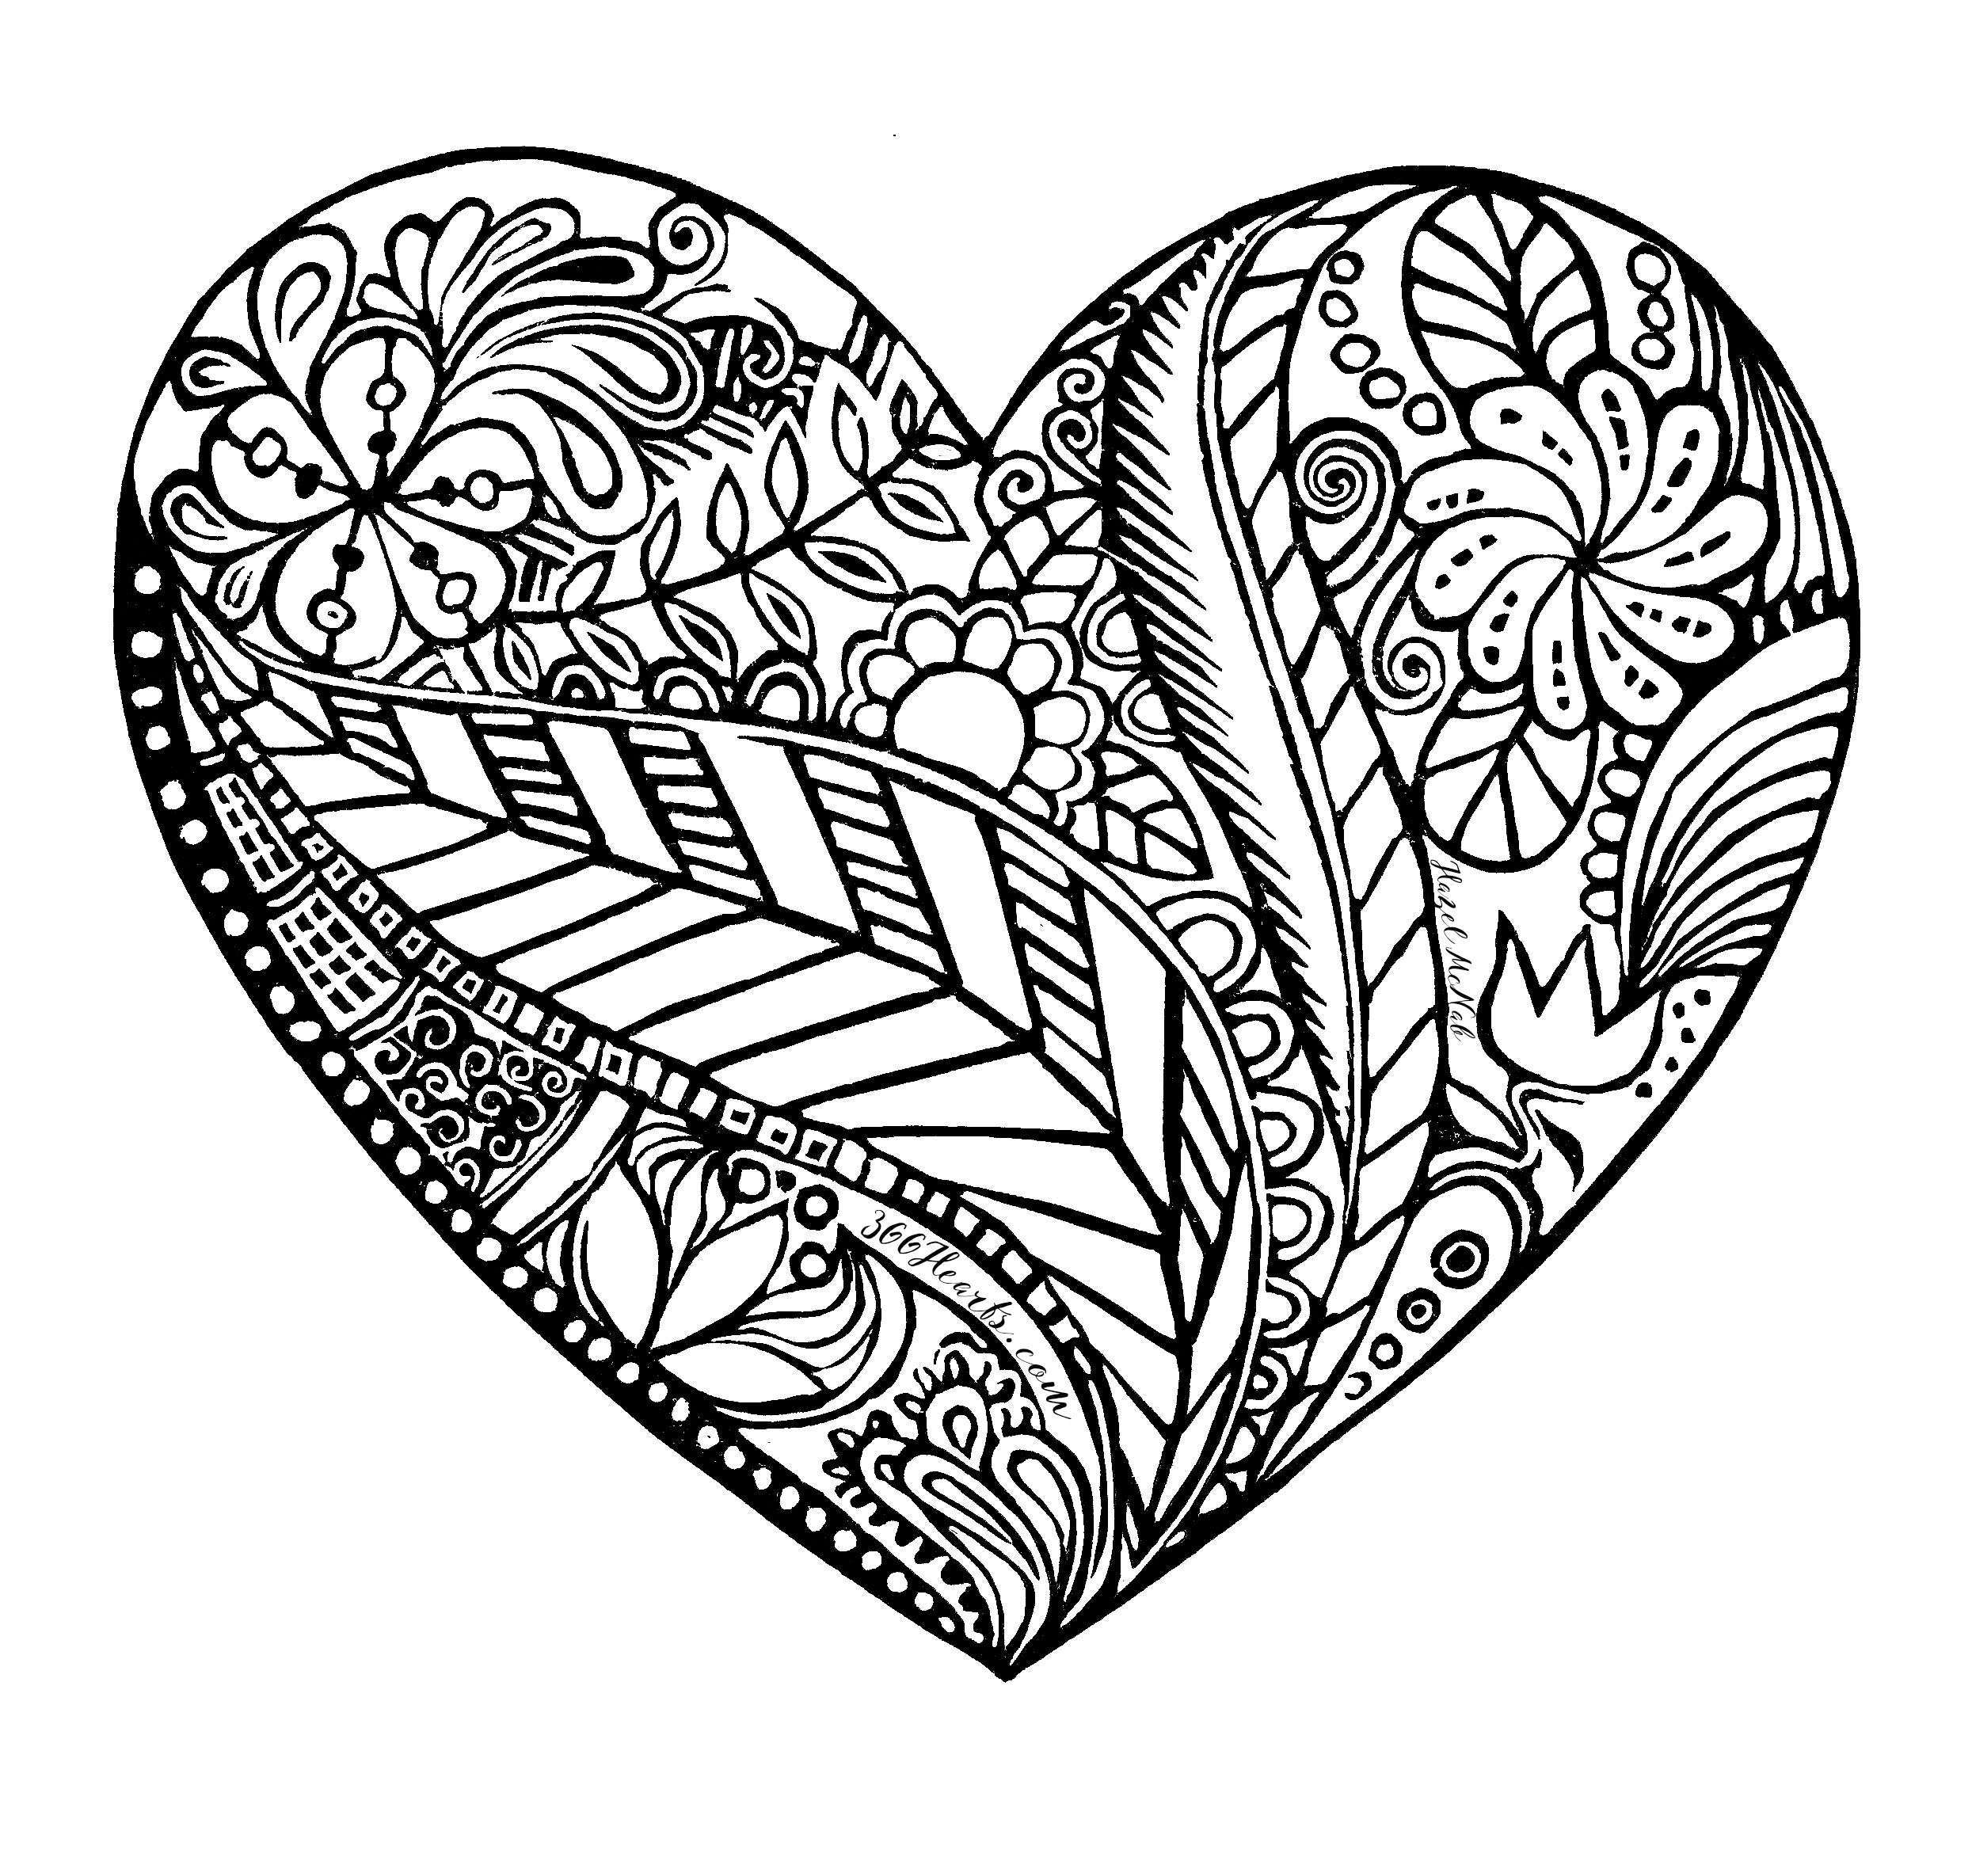 Printable Heart Coloring Pages at GetDrawings Free download